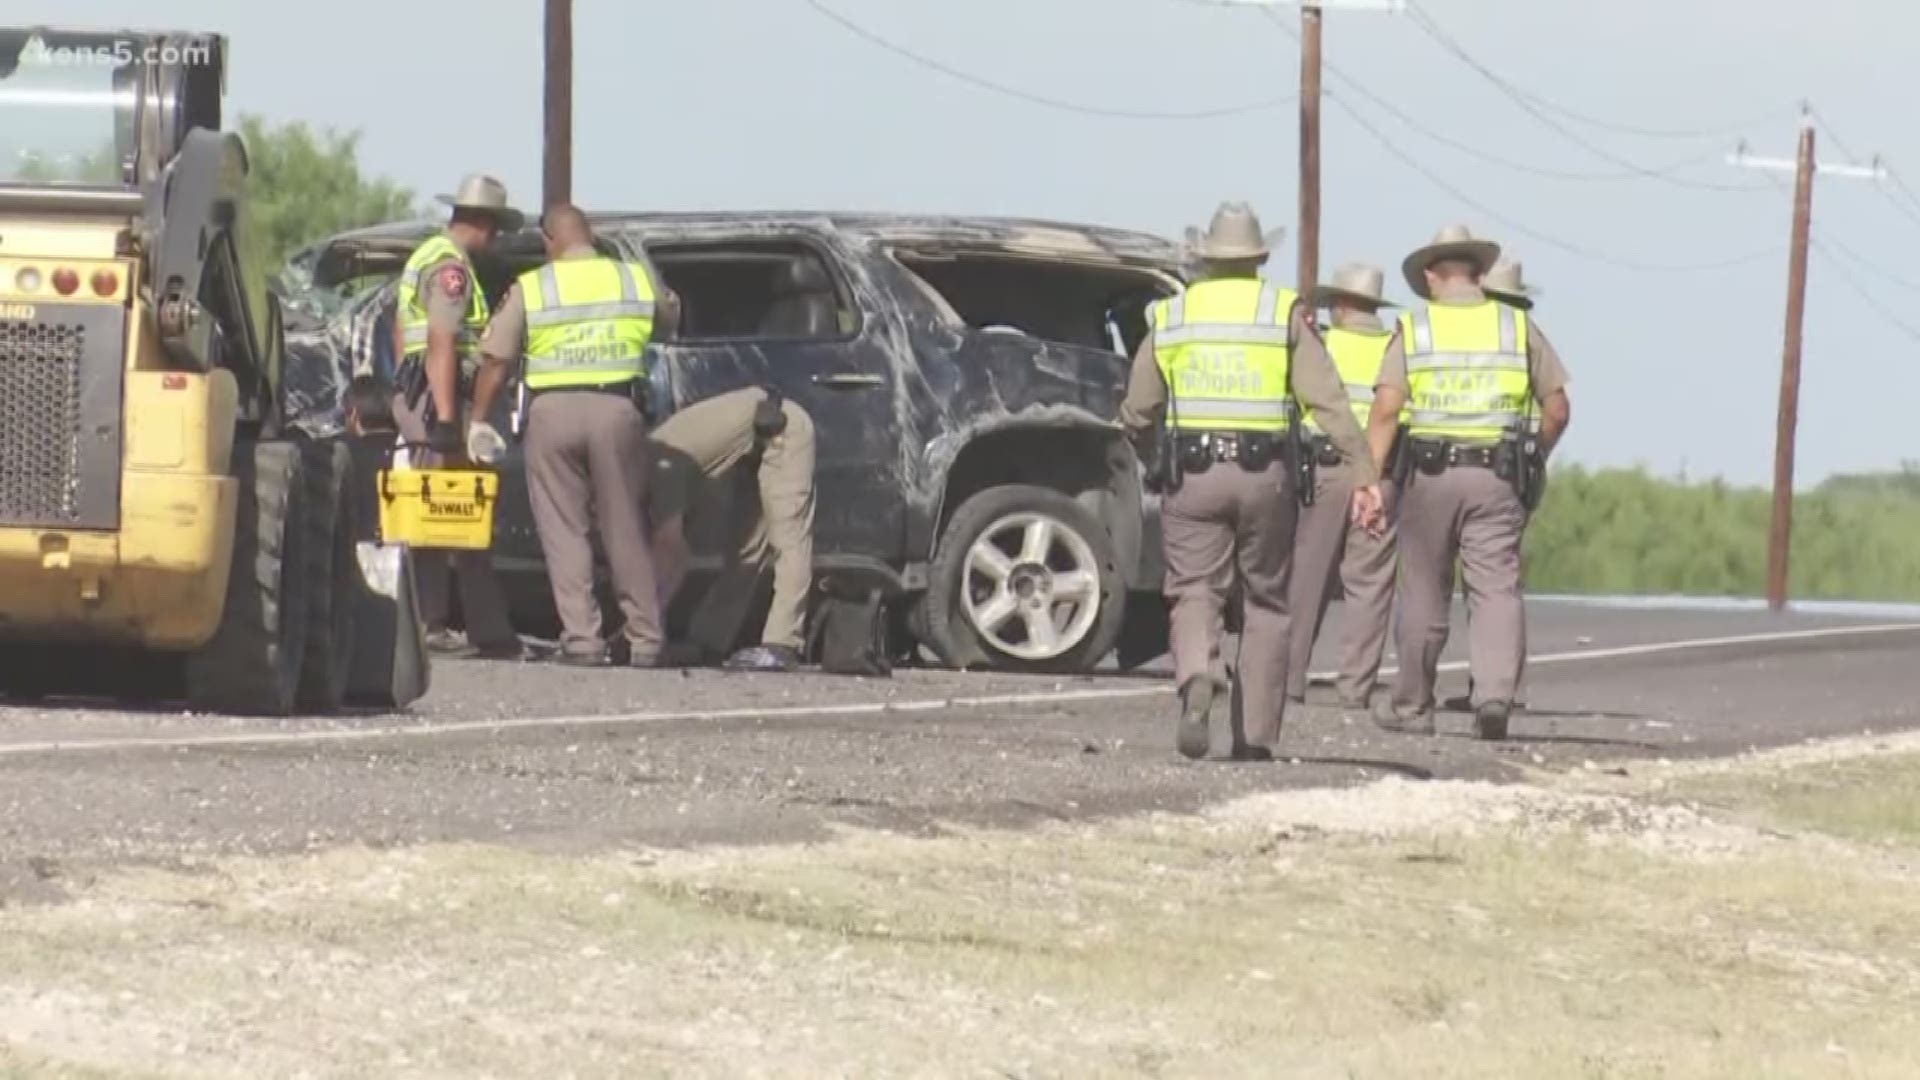 At least 5 undocumented immigrants were killed in a major crash after a high-speed a chase.